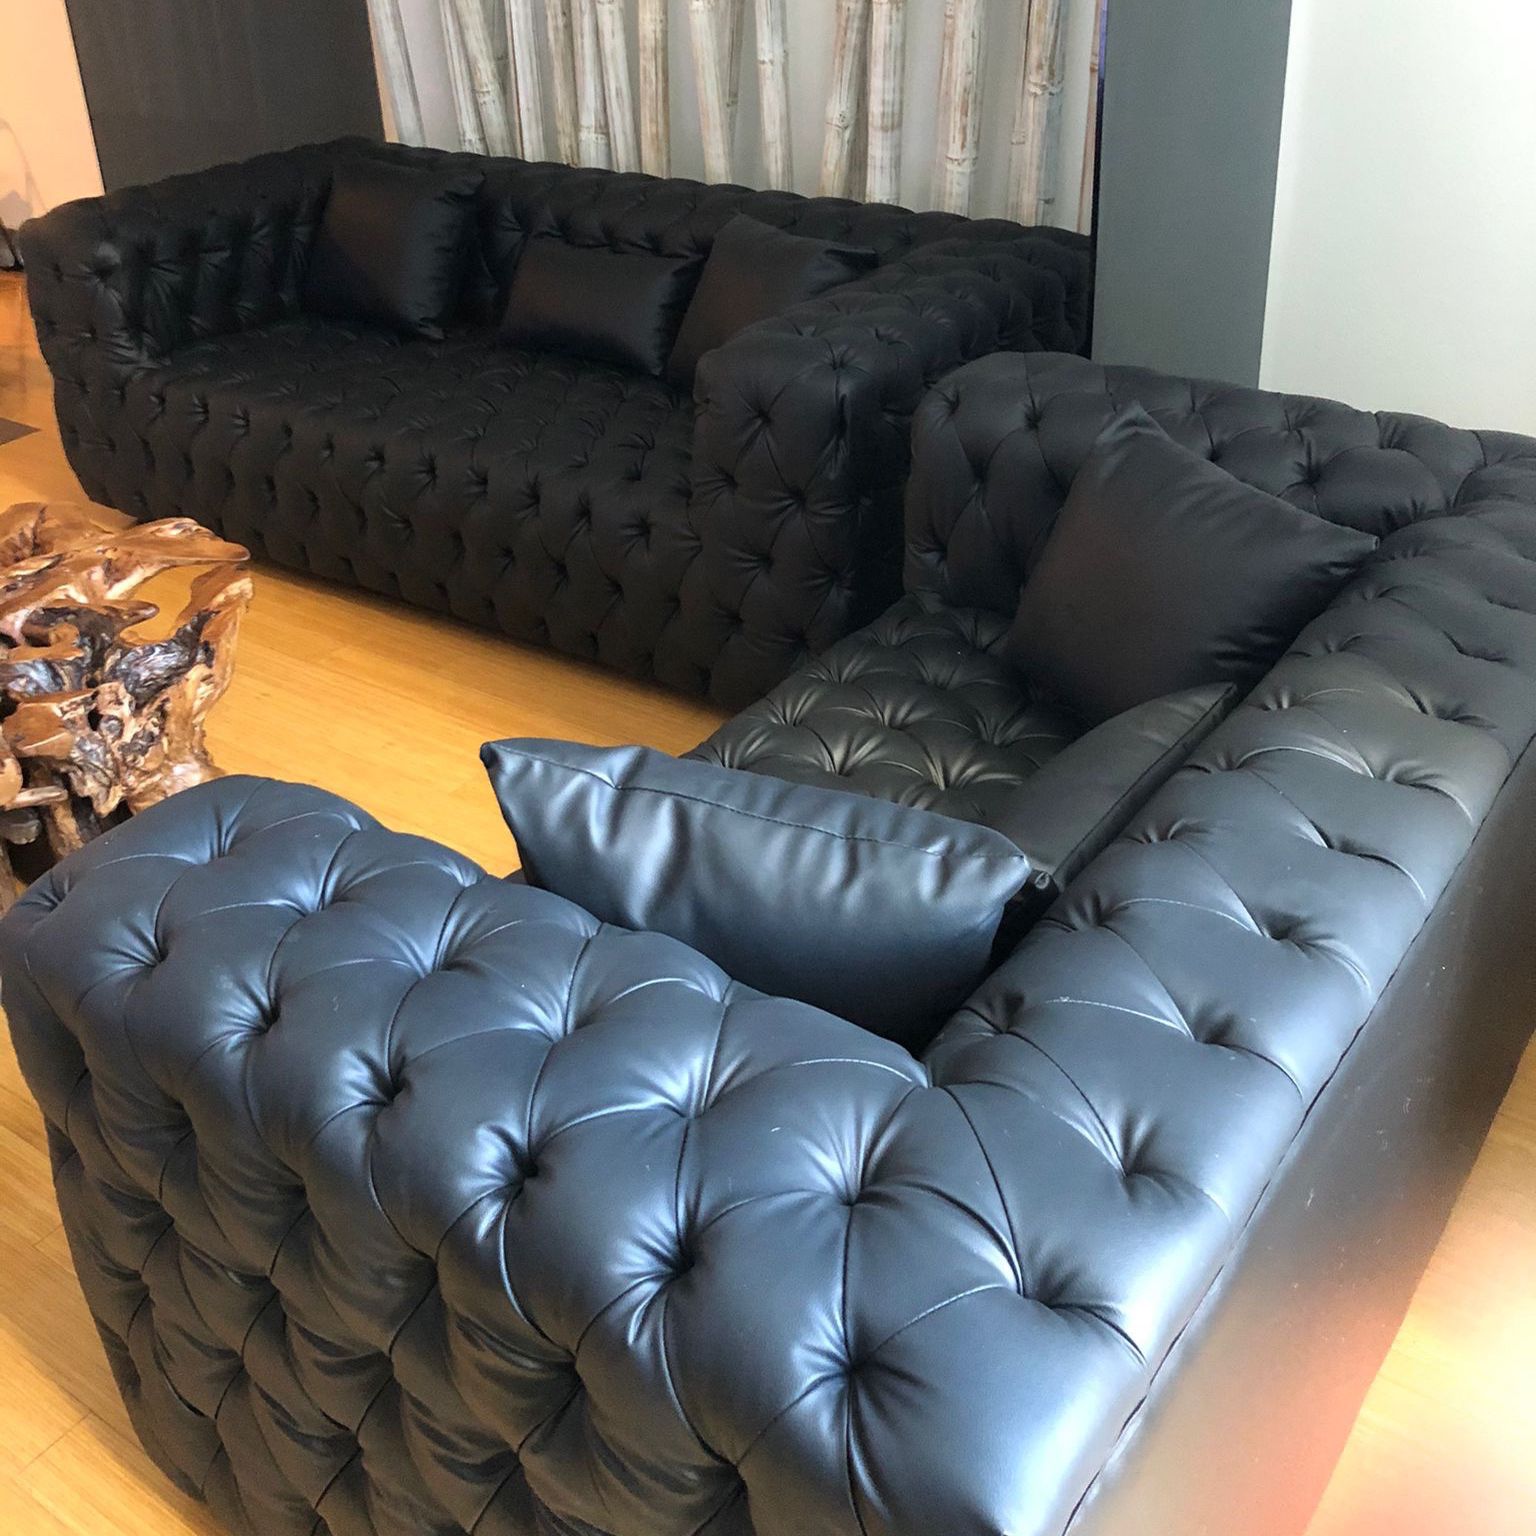 NEW!!✨2PCS Black Sofa Set✨Easy Pay Options✨Delivery Express🚚✨